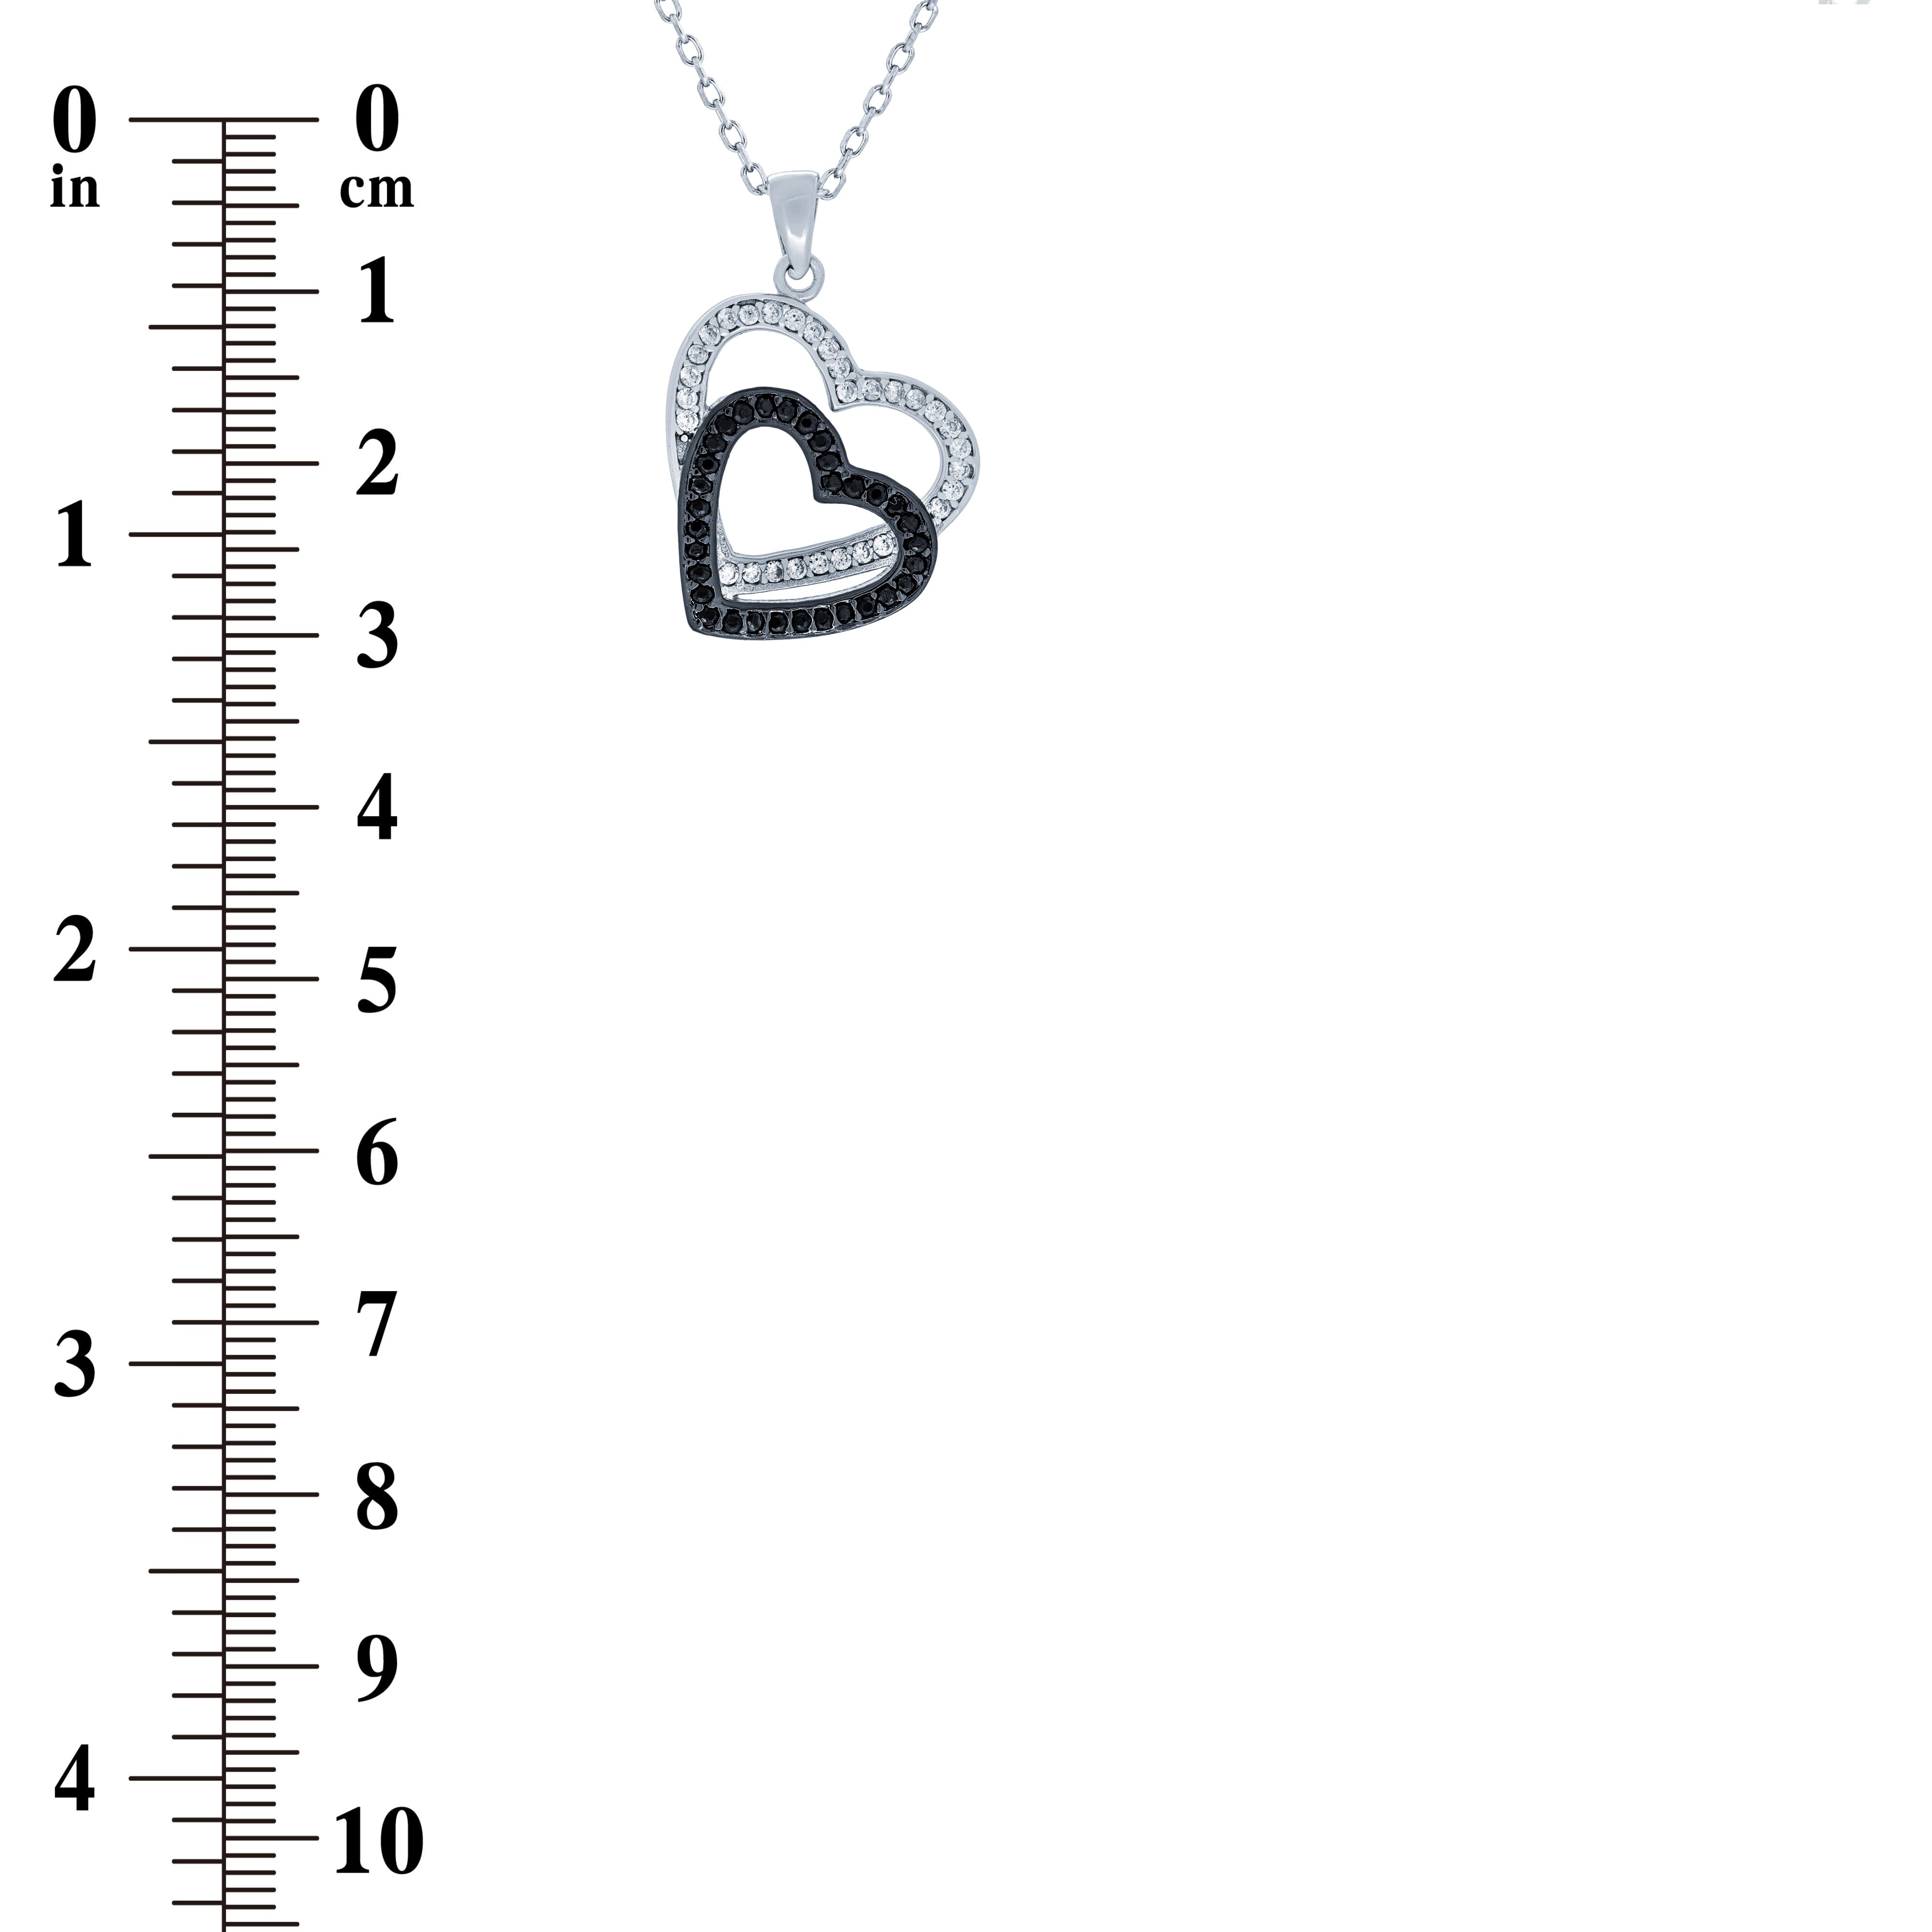 (100160) White & Black Cubic Zirconia Heart Pendant Necklace In Sterling Silver